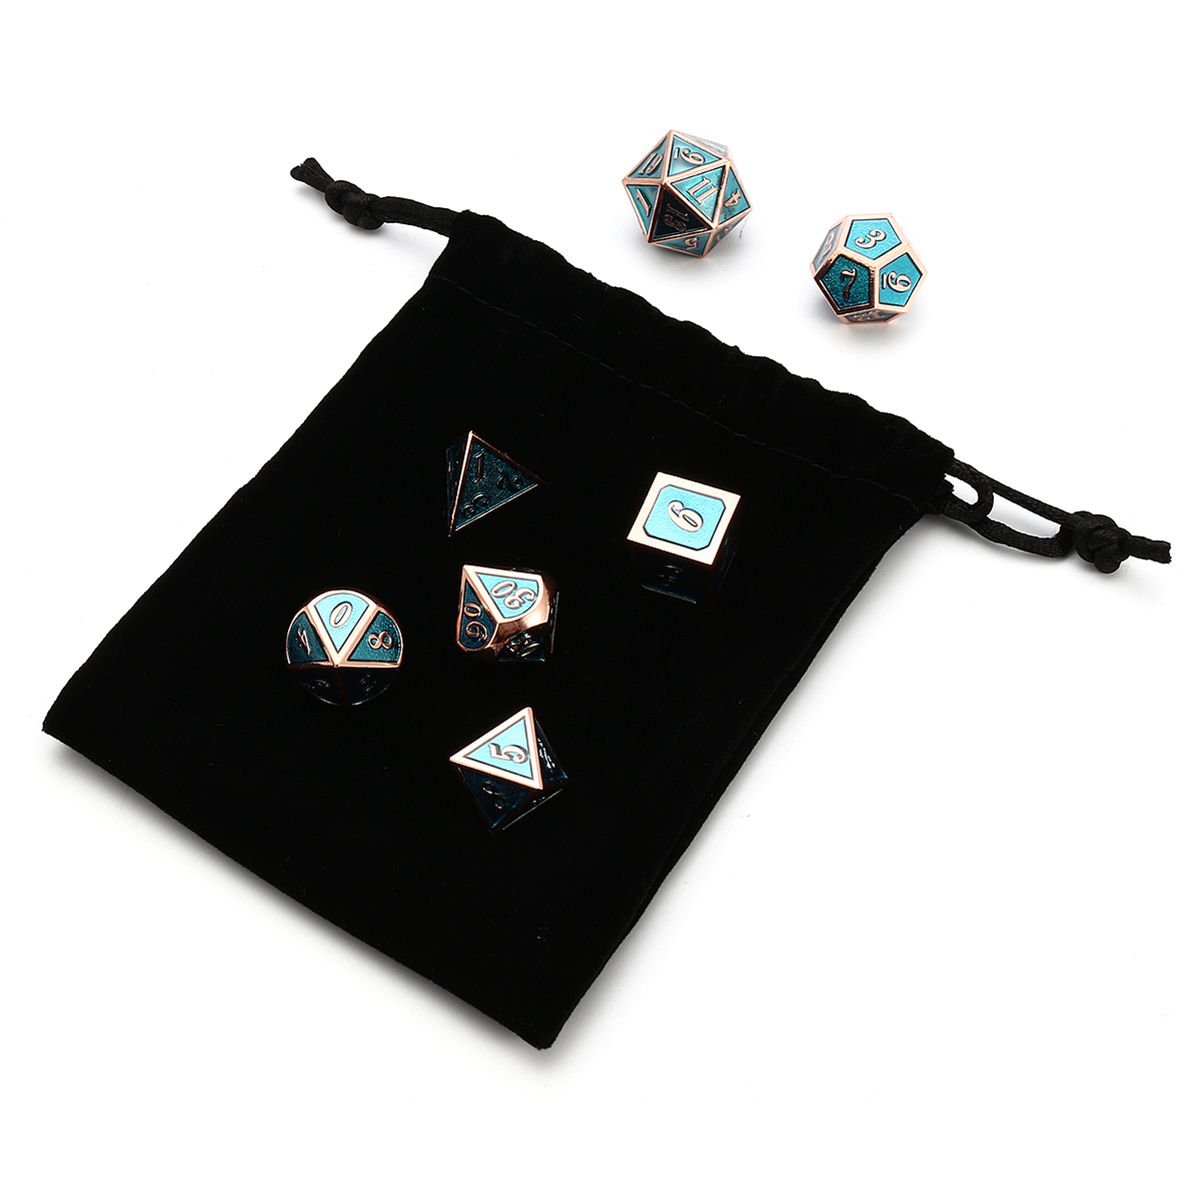 7pcs-Zinc-Alloy-Multisided-Dices-Set-Enamel-Embossed-Heavy-Metal-Polyhedral-Dice-With-Bag-1272100-4